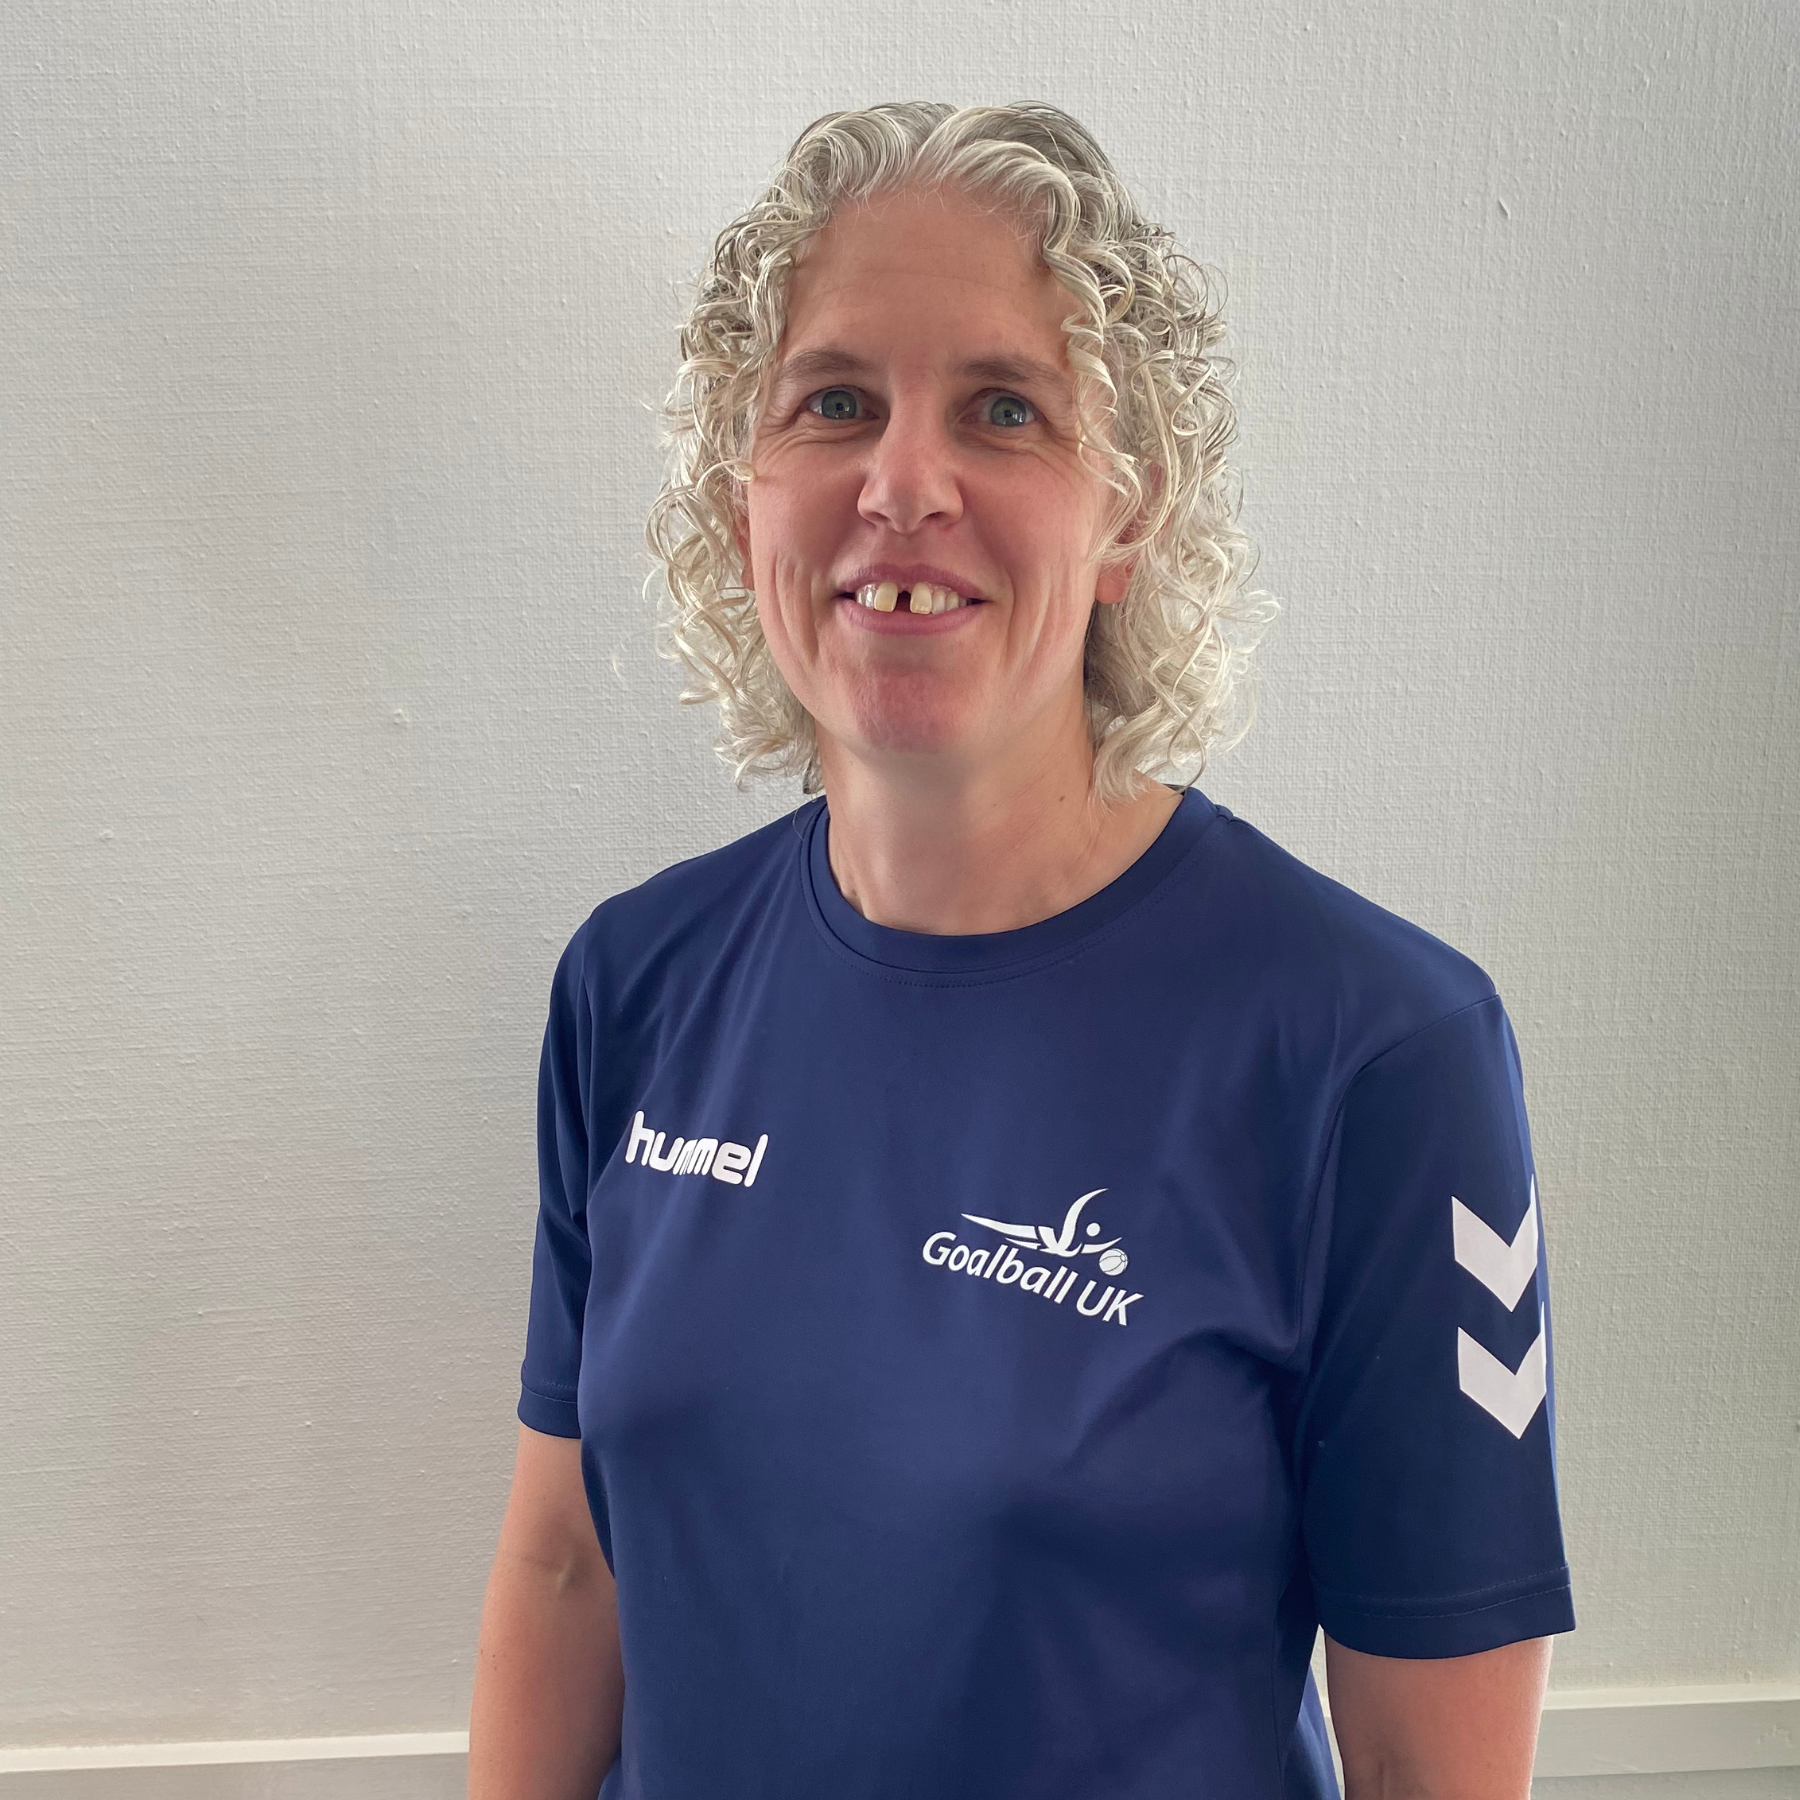 Kathryn Fielding portrait. Kathryn is wearing a blue Goalball UK t-shirt and is stood infront of a white wall